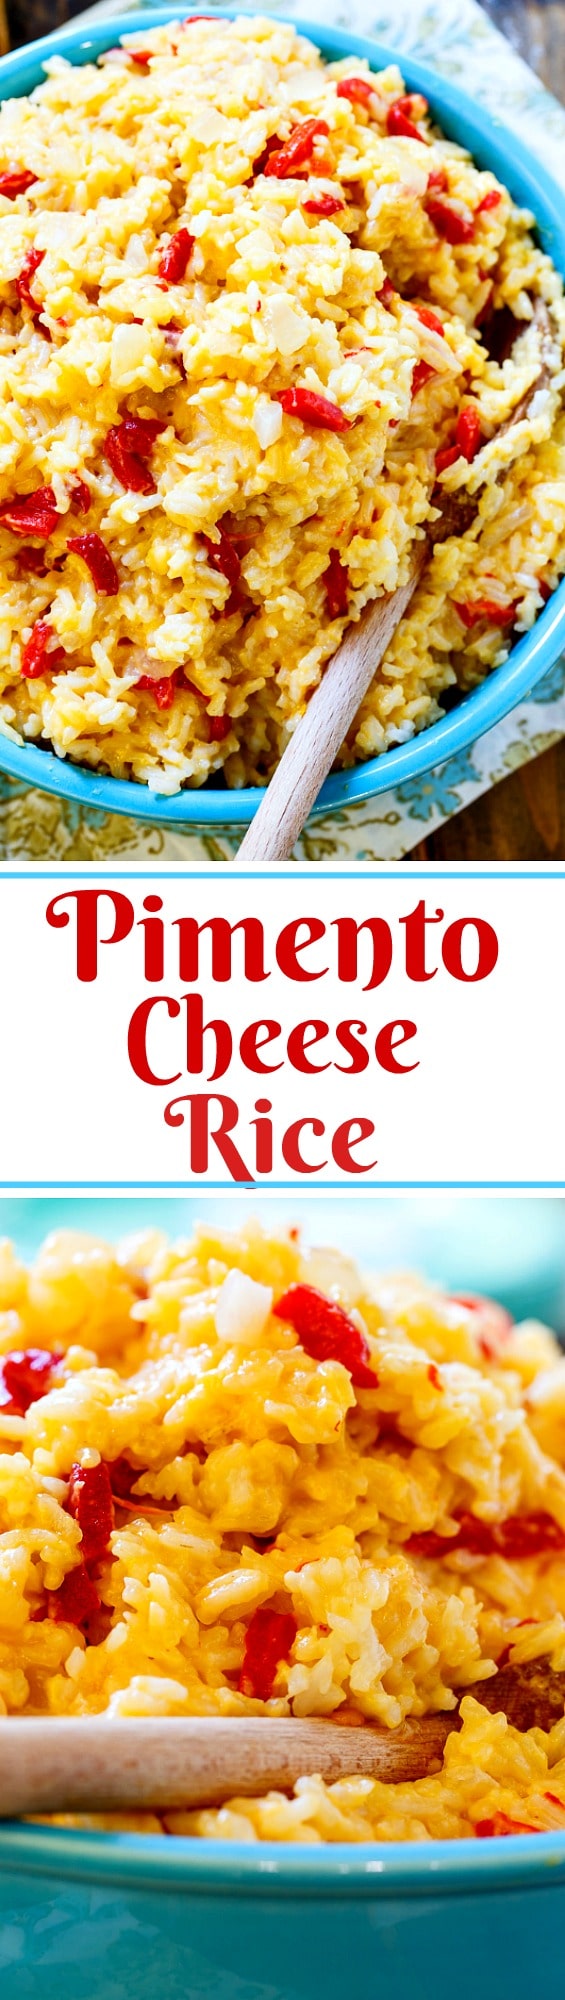 Pimento Cheese Rice combines the flavors of pimento cheese with white rice to create a cheesy, flavorful side dish.